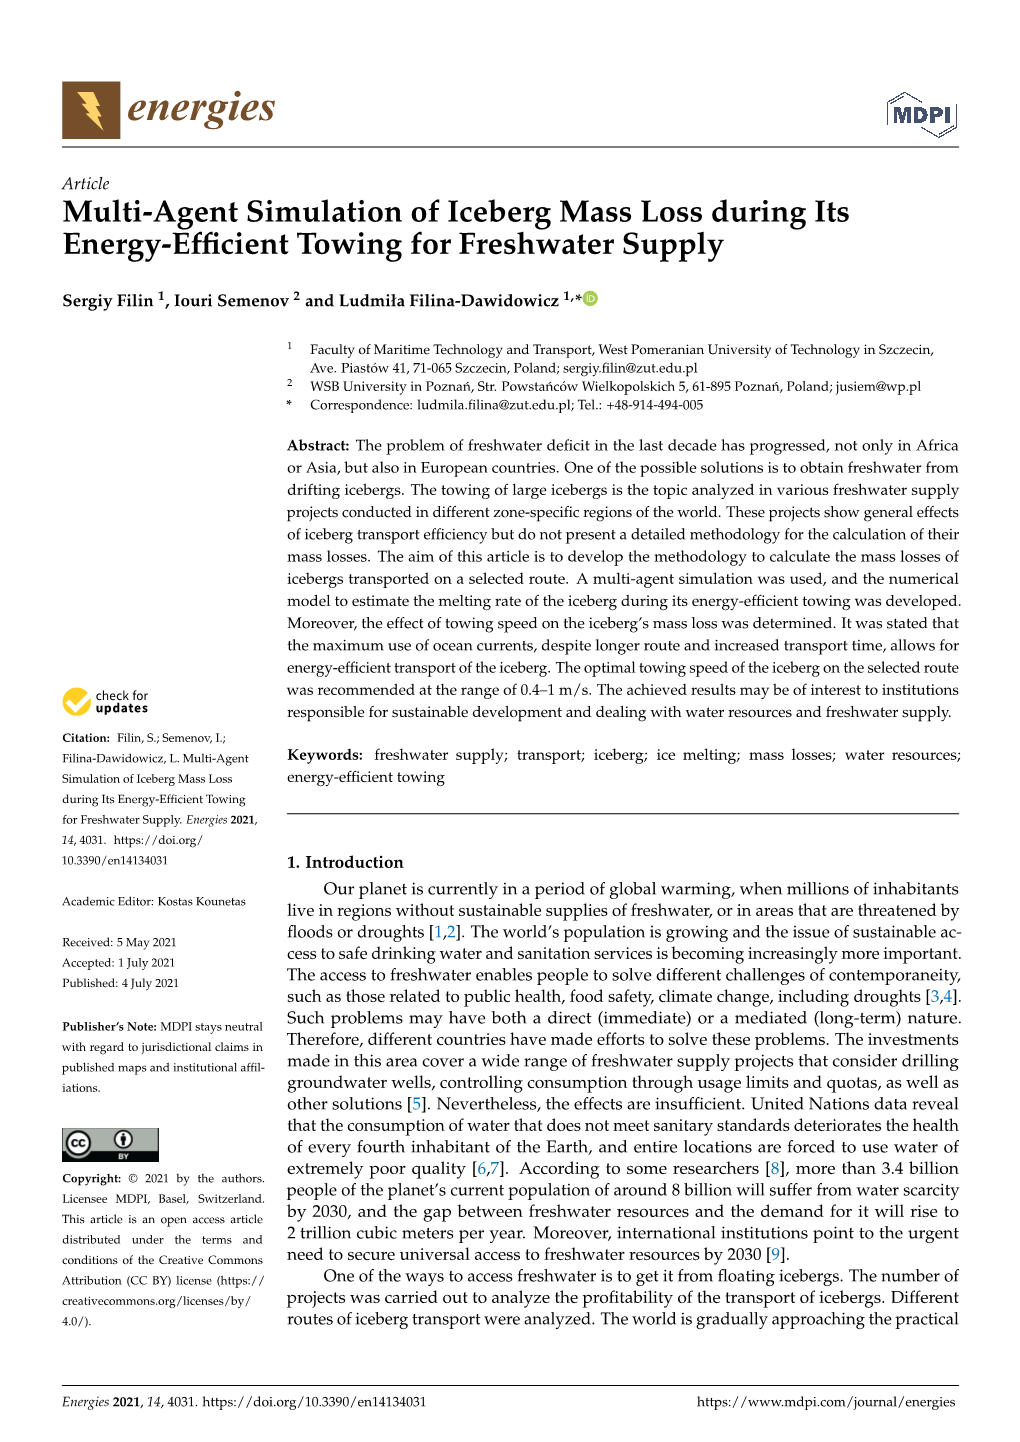 Multi-Agent Simulation of Iceberg Mass Loss During Its Energy-Efﬁcient Towing for Freshwater Supply